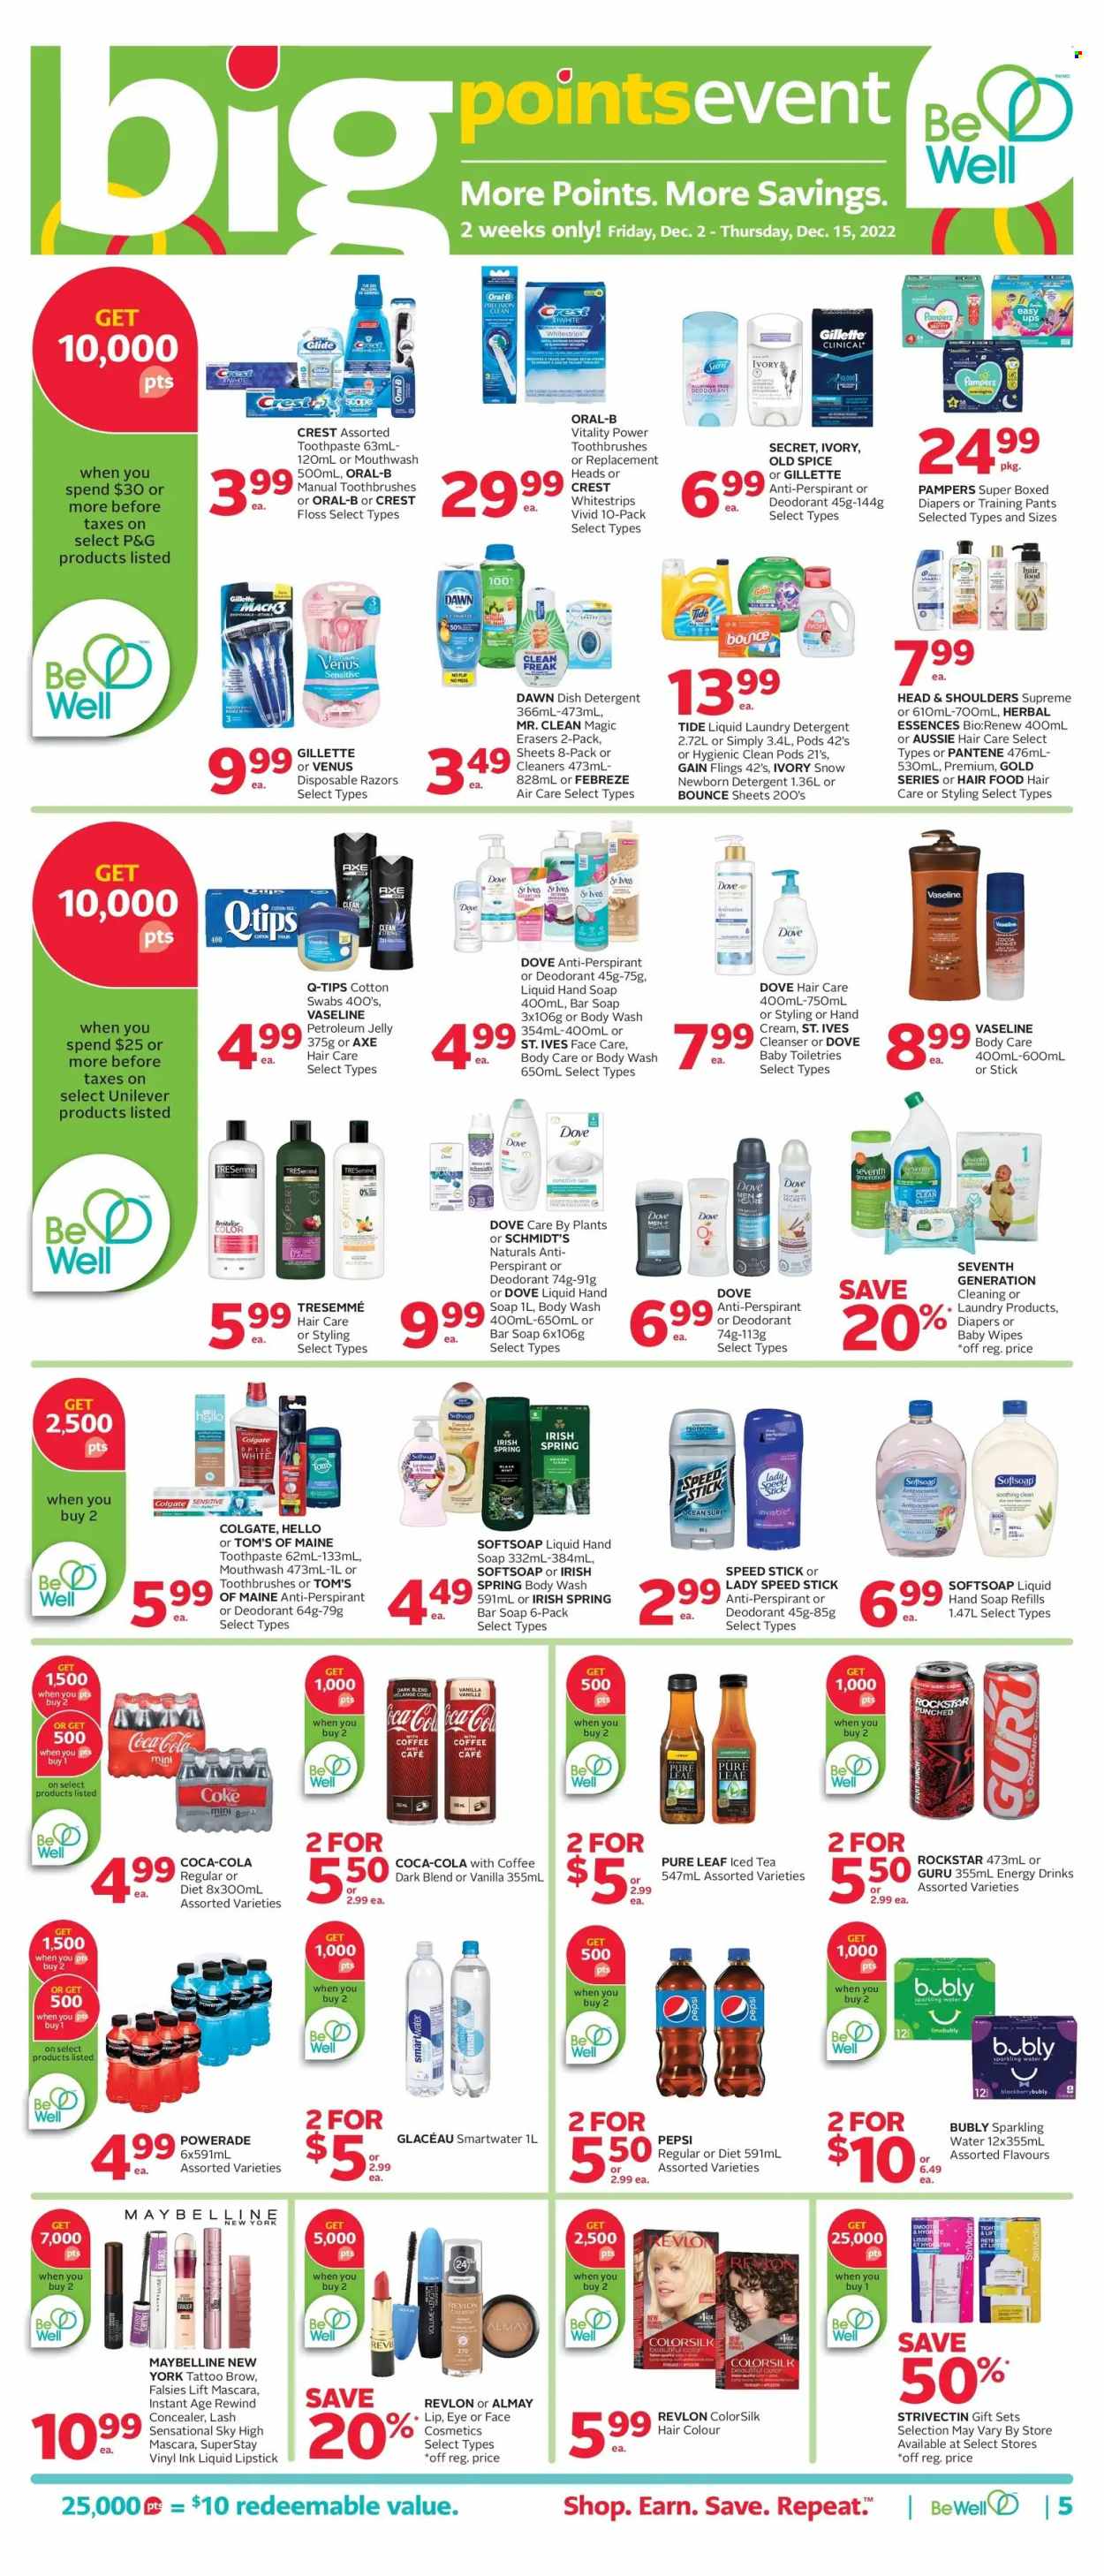 thumbnail - Rexall Flyer - December 02, 2022 - December 08, 2022 - Sales products - Dove, spice, Coca-Cola, Powerade, Pepsi, energy drink, ice tea, Rockstar, sparkling water, Smartwater, Pure Leaf, wipes, pants, baby wipes, nappies, baby pants, petroleum jelly, Febreze, Gain, Tide, laundry detergent, Bounce, dishwasher cleaner, body wash, Softsoap, hand soap, Vaseline, soap bar, soap, toothpaste, mouthwash, Crest, Almay, cleanser, Gillette, Aussie, Revlon, TRESemmé, hair color, Herbal Essences, hand cream, anti-perspirant, Speed Stick, Axe, Venus, disposable razor, corrector, lipstick, mascara, Maybelline, detergent, Colgate, Head & Shoulders, Pampers, Pantene, Old Spice, Oral-B, deodorant. Page 6.